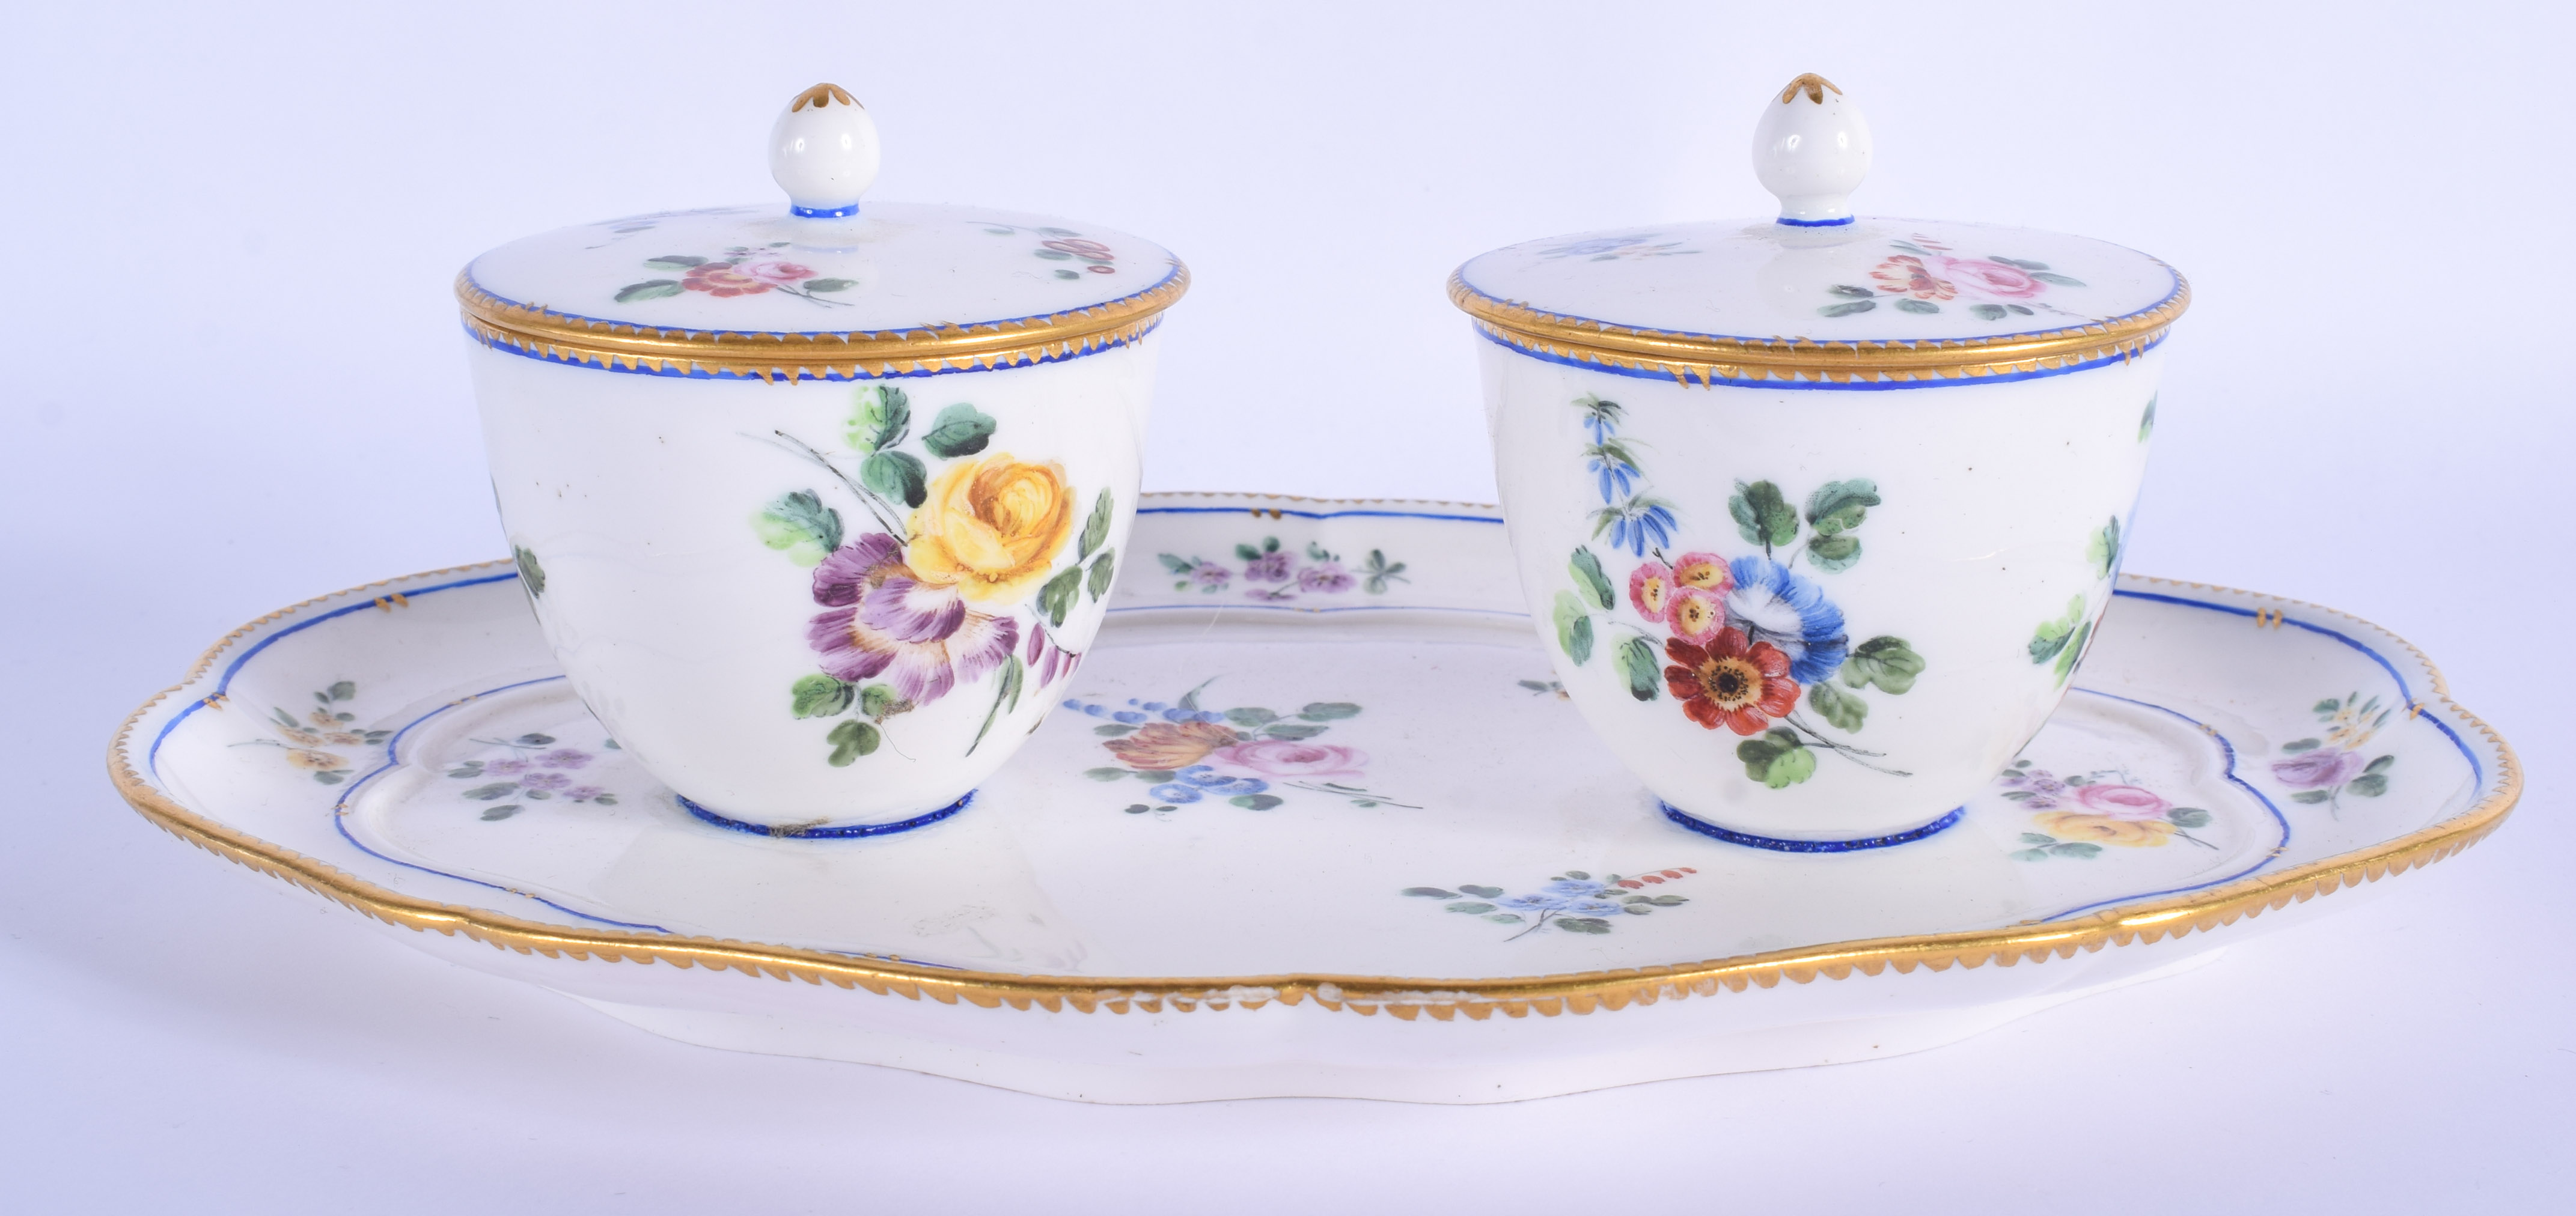 18th c. Sevres double preserve-stand and two covers (plateau a deux pots de confitures) painted wi - Image 2 of 4